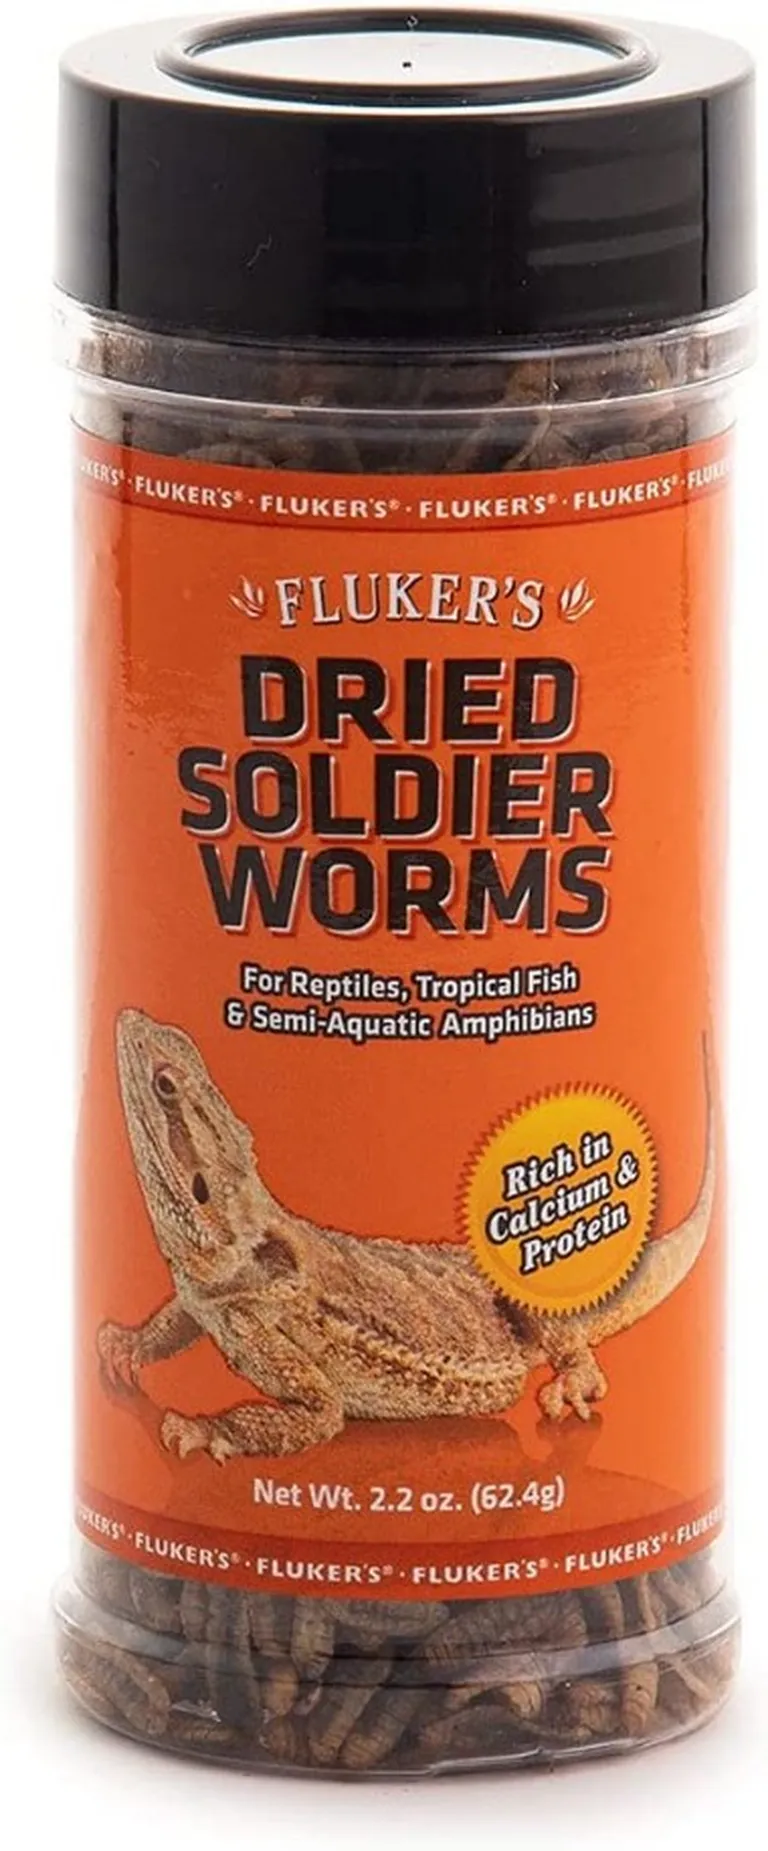 Flukers Dried Soldier Worms for Reptiles, Tropical Fish, Amphibians, Small Animals and Birds Photo 2